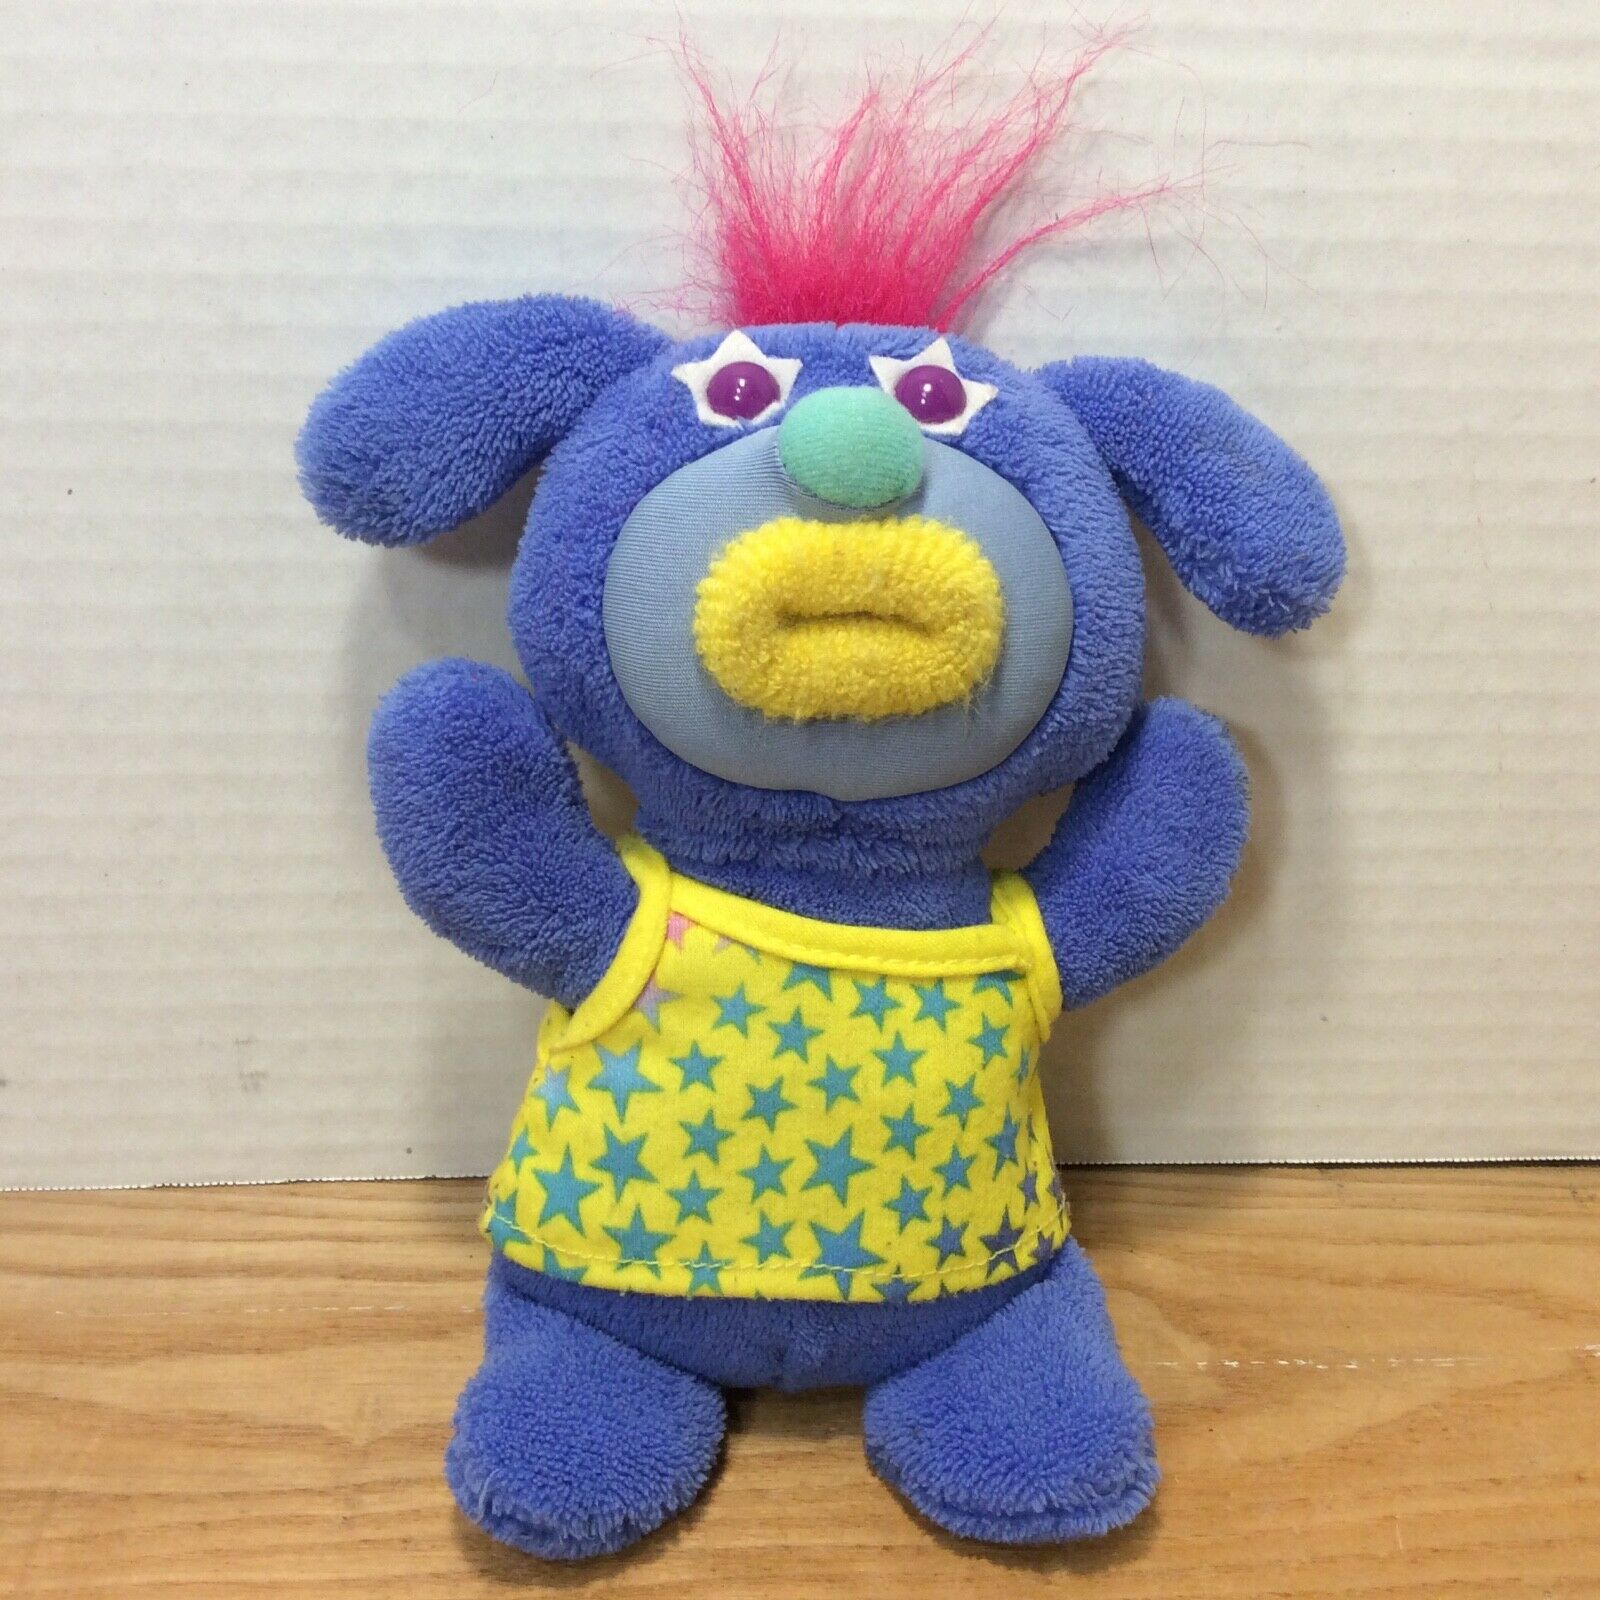 Sing-a-ma-jigs Violet Plush Singing Toy "99 Singamajigs On The Wall” Blue Yello